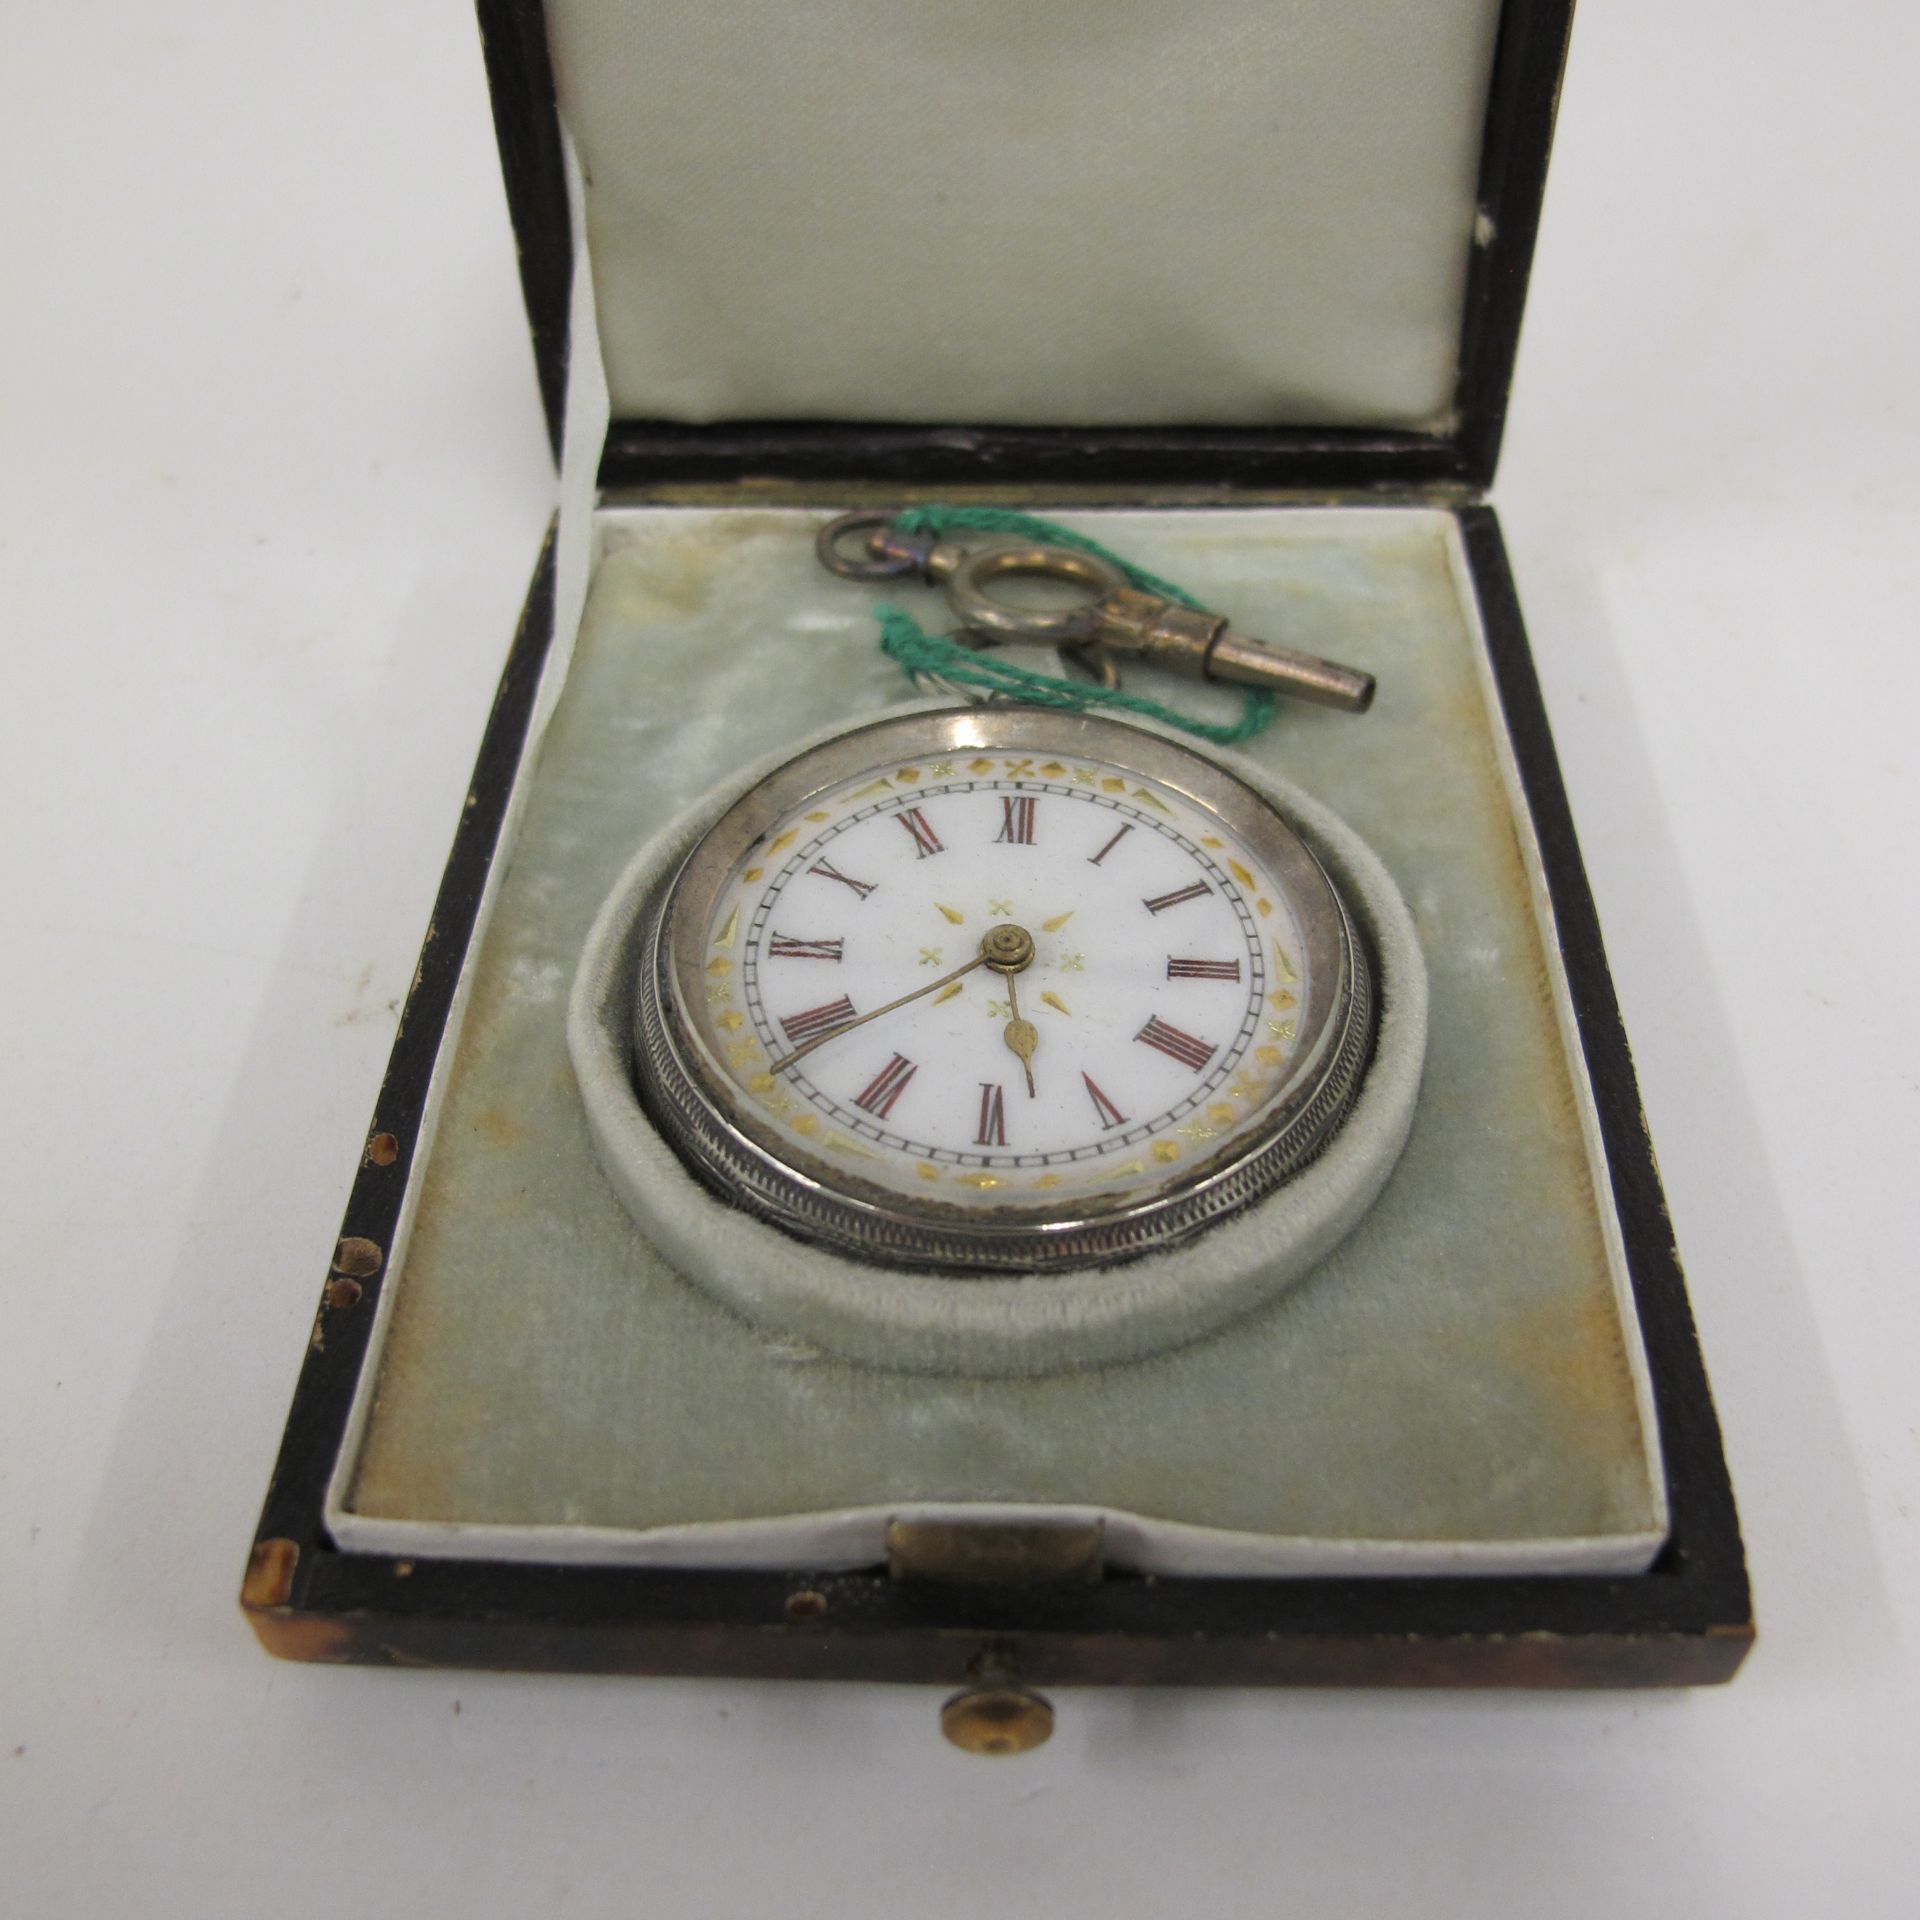 Antique Swiss Silver Fob Watch in a Tortoiseshell Antique Case (est £80-£120)